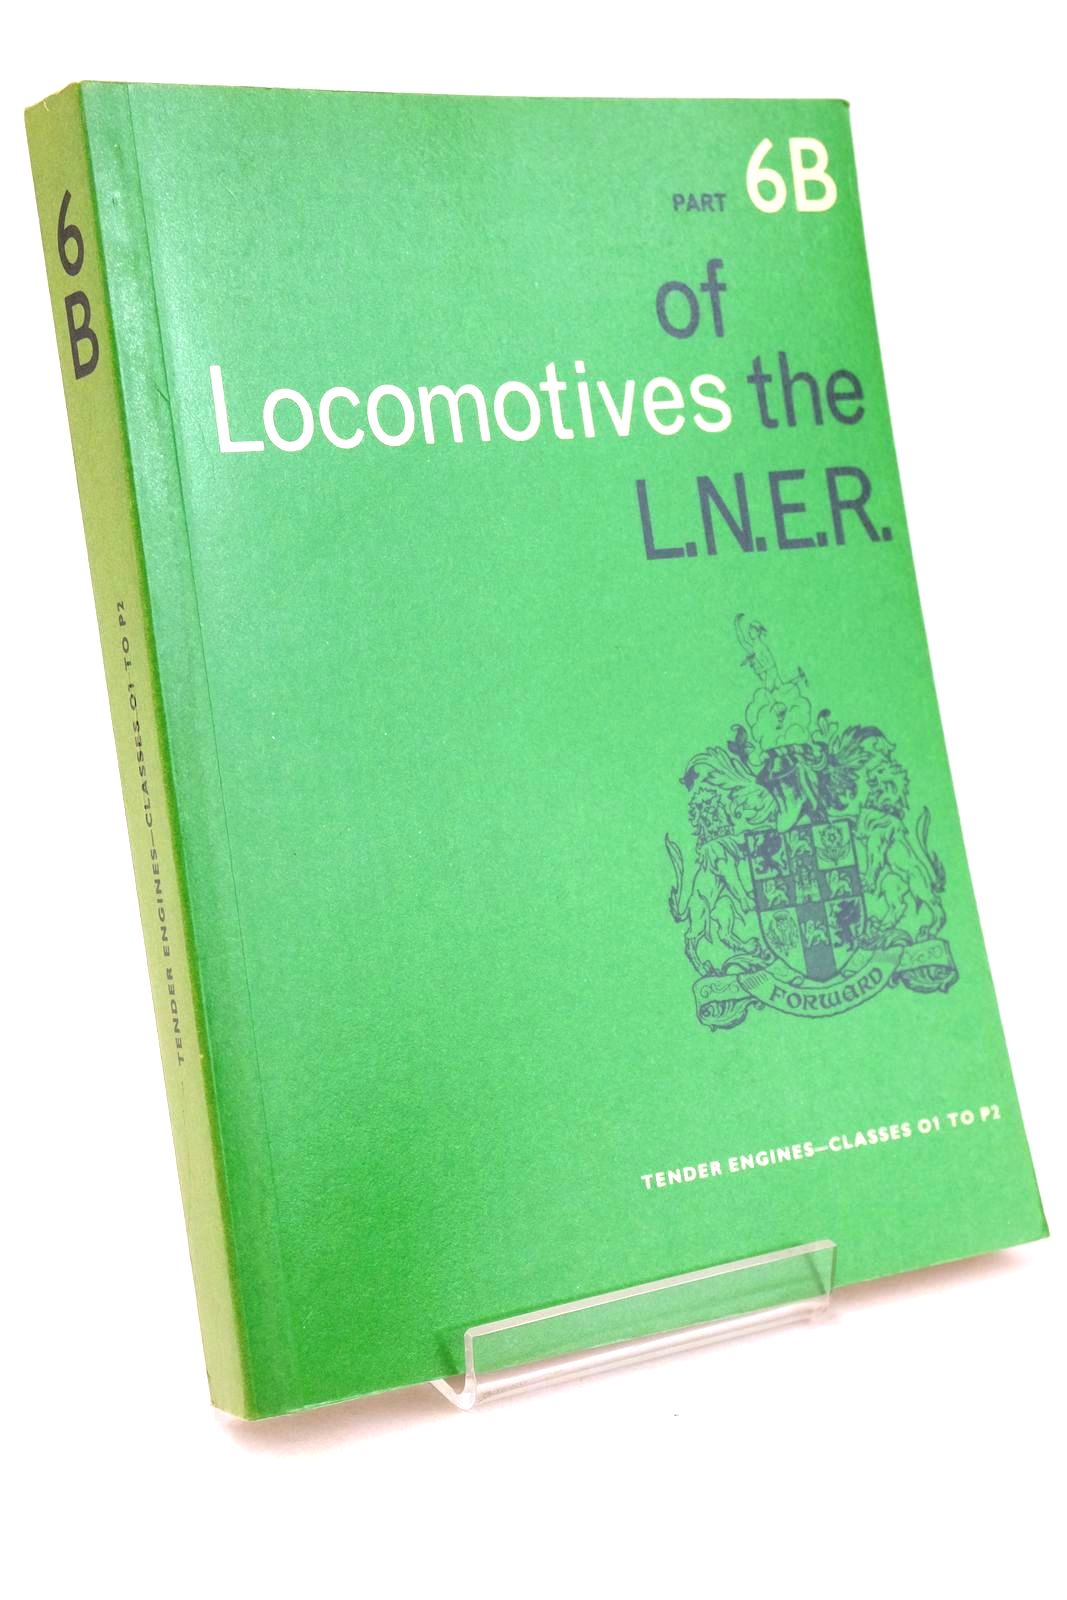 Photo of LOCOMOTIVES OF THE L.N.E.R. PART 6B published by The Railway Correspondence And Travel Society (STOCK CODE: 1327343)  for sale by Stella & Rose's Books